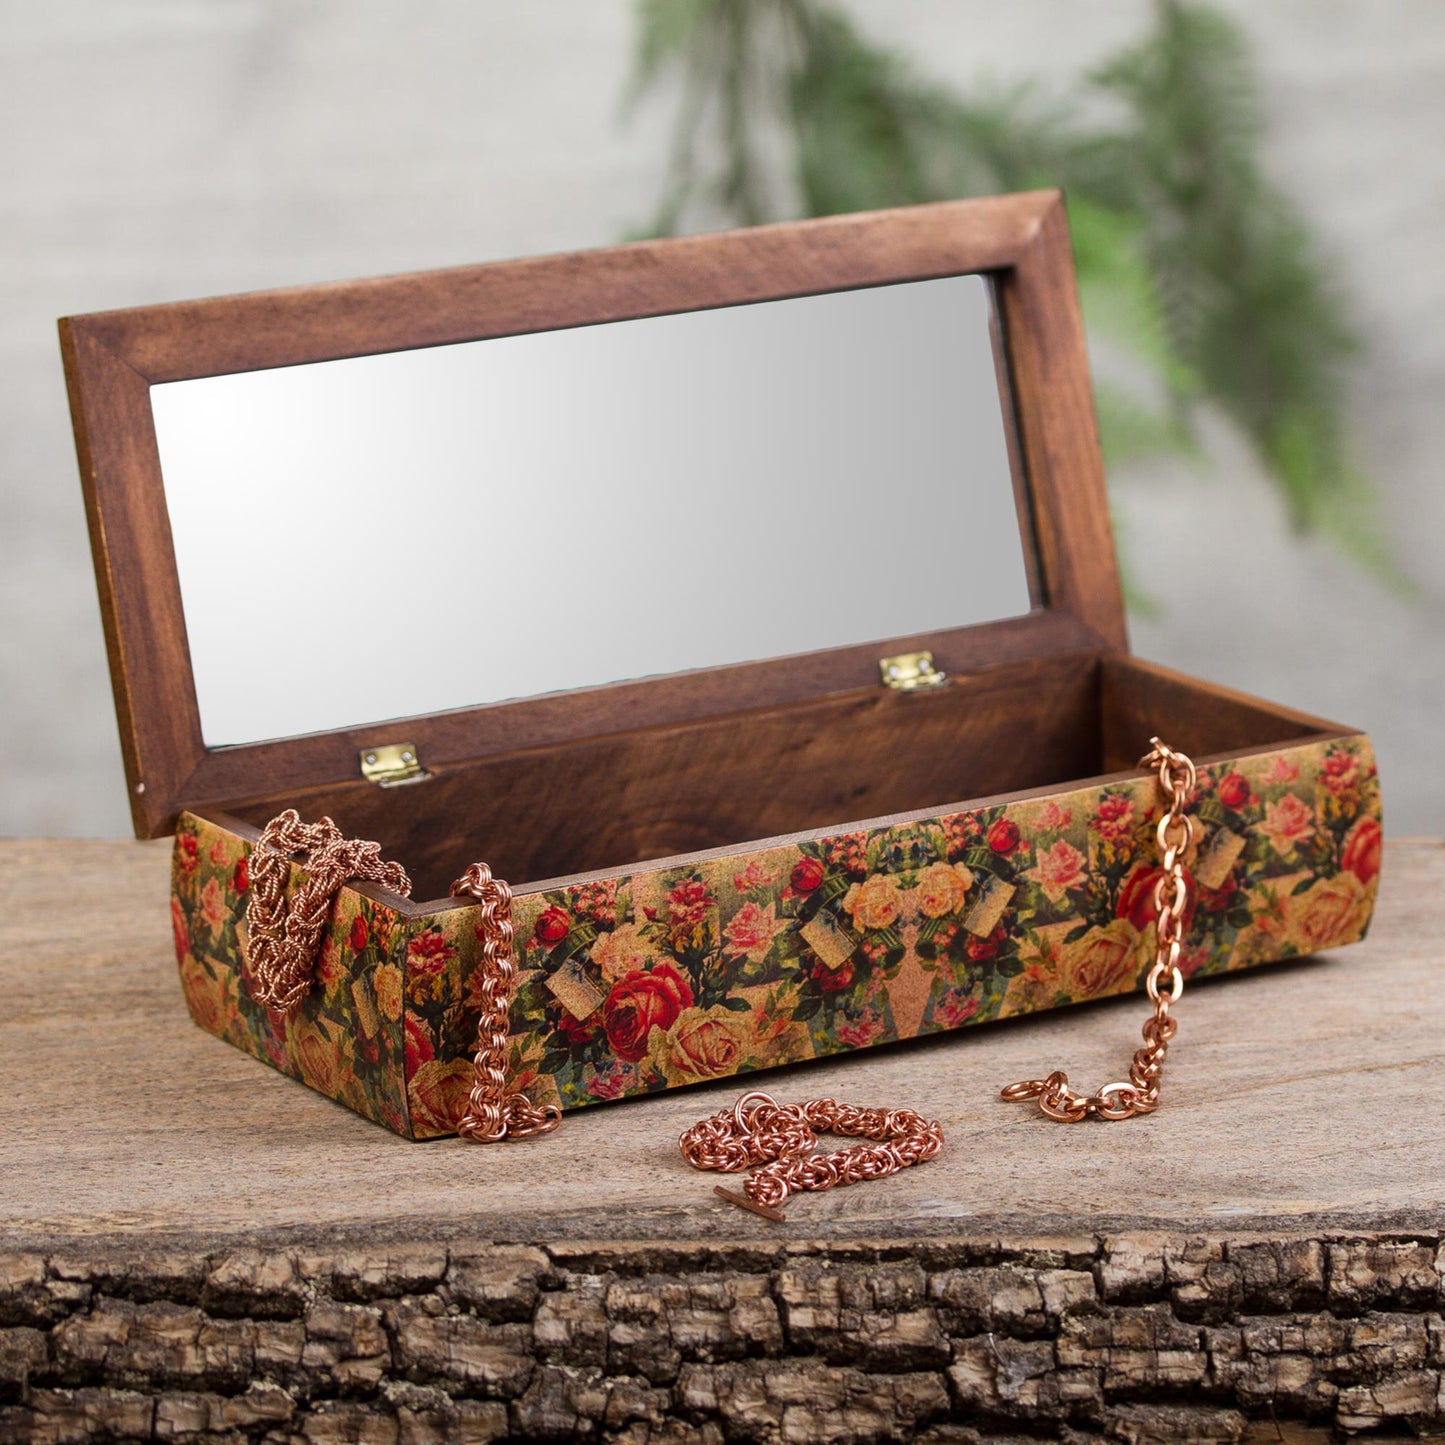 Roses Mexico Handcrafted Floral Decoupage Jewelry Box with Mirror